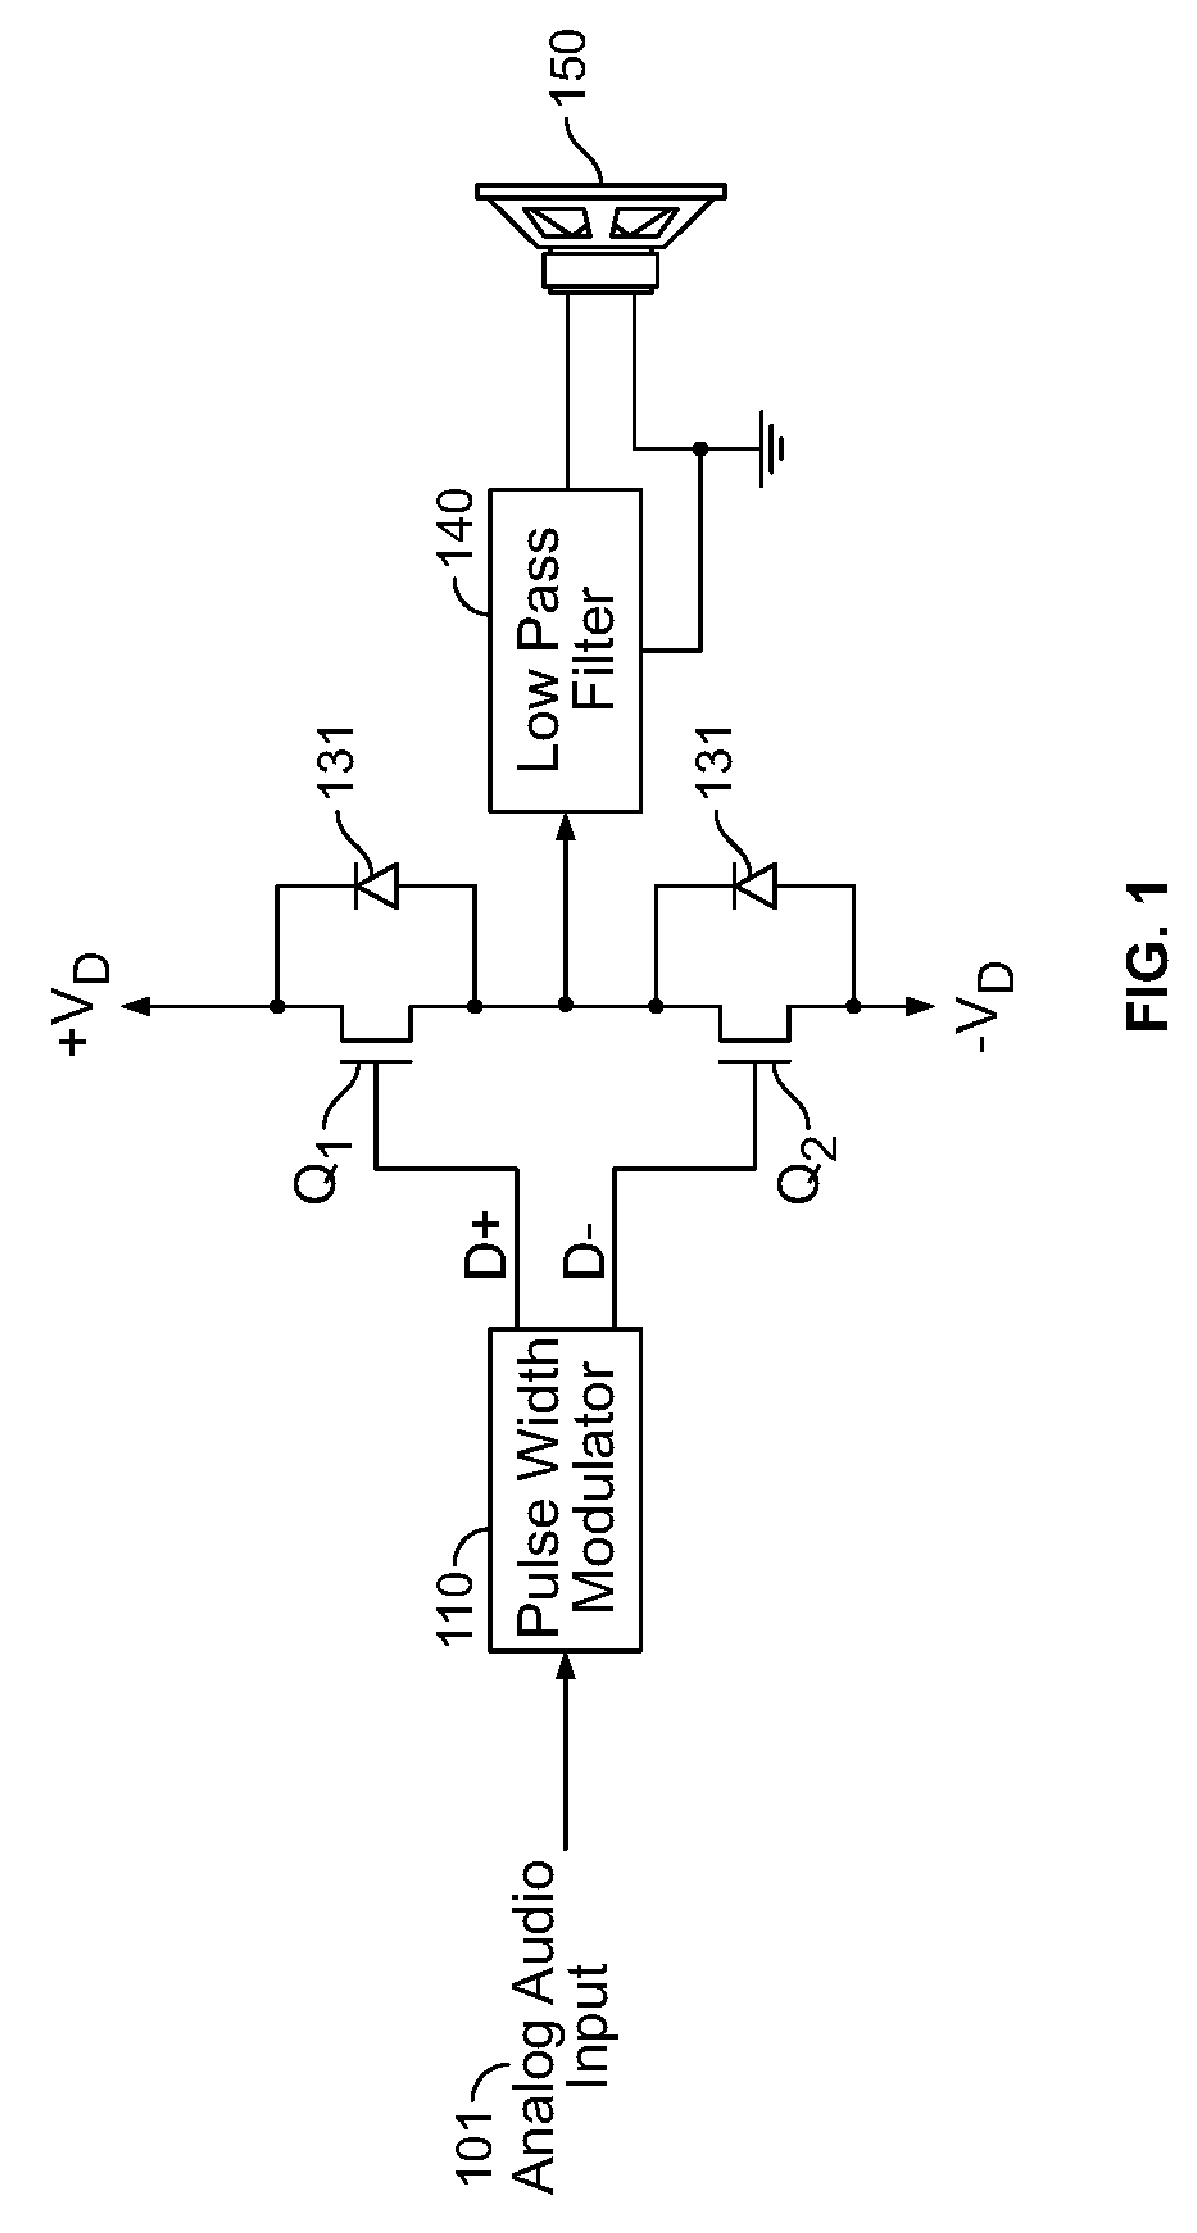 Method and apparatus for implementing soft switching in a class d amplifier